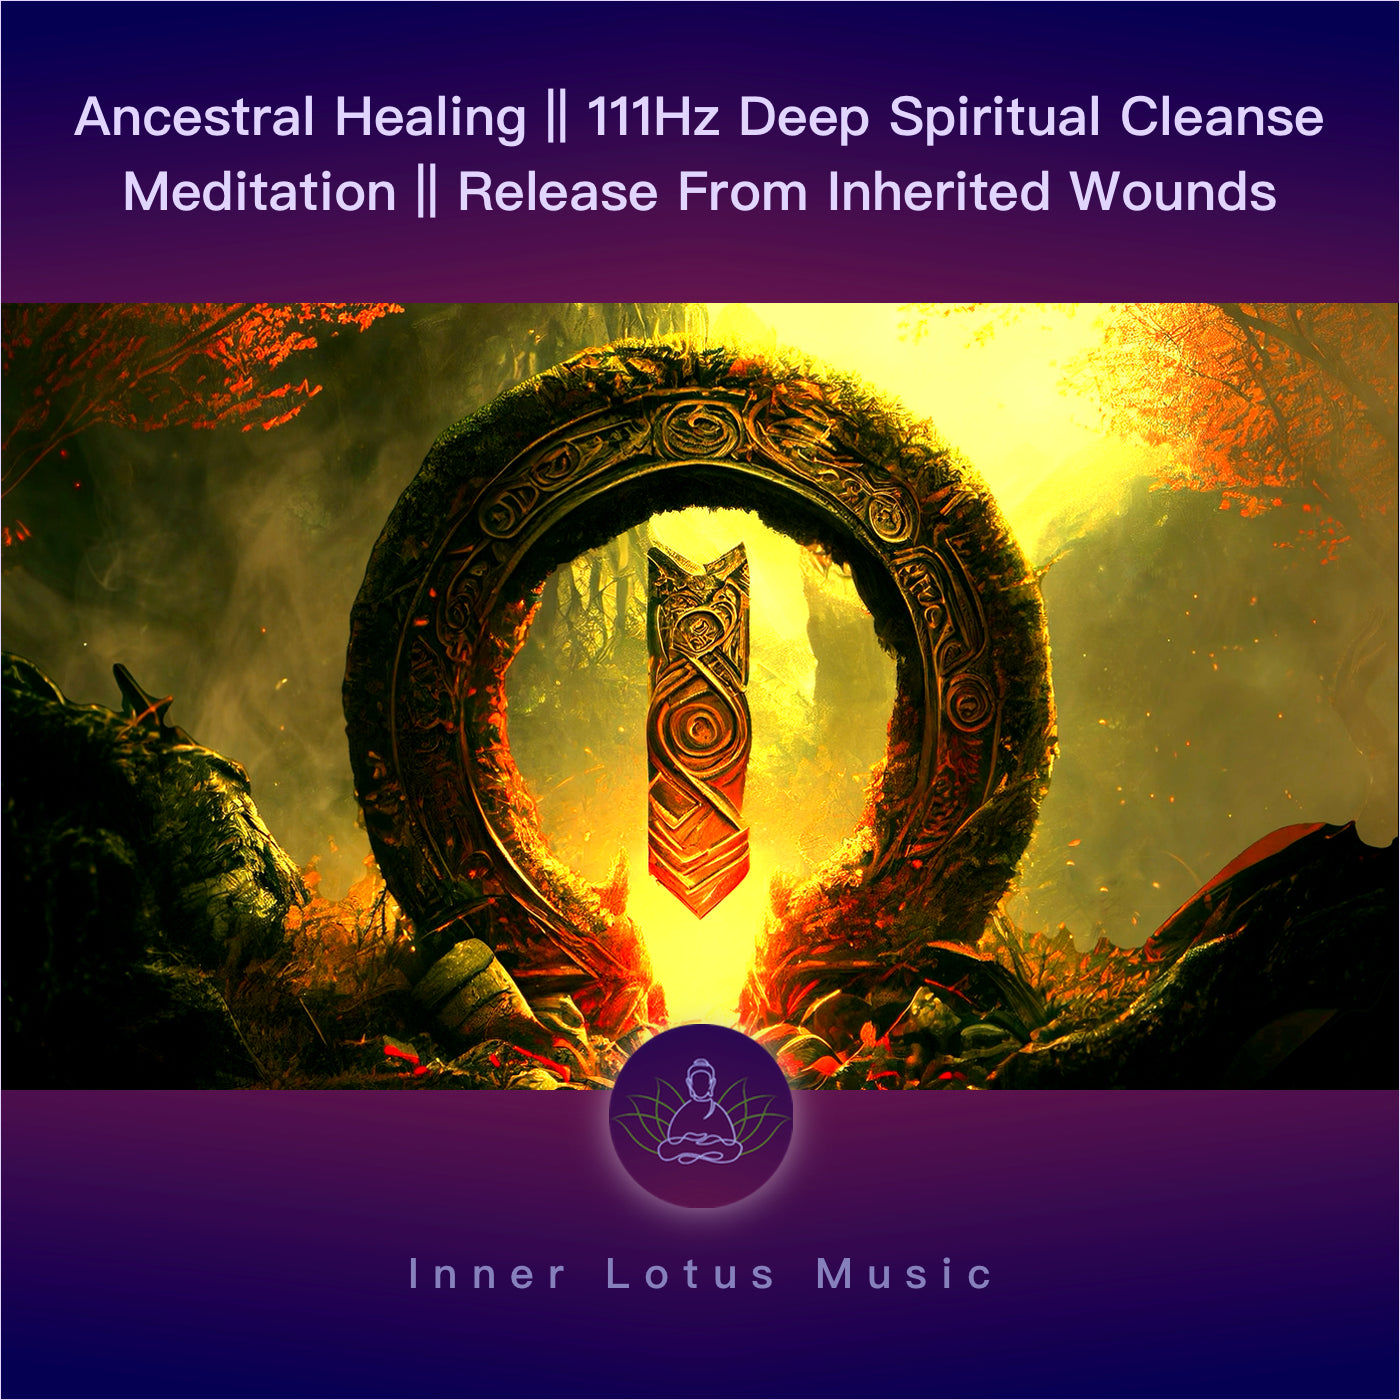 Ancestral Healing || 111Hz Deep Spiritual Cleanse Meditation Music || Release From Inherited Wounds